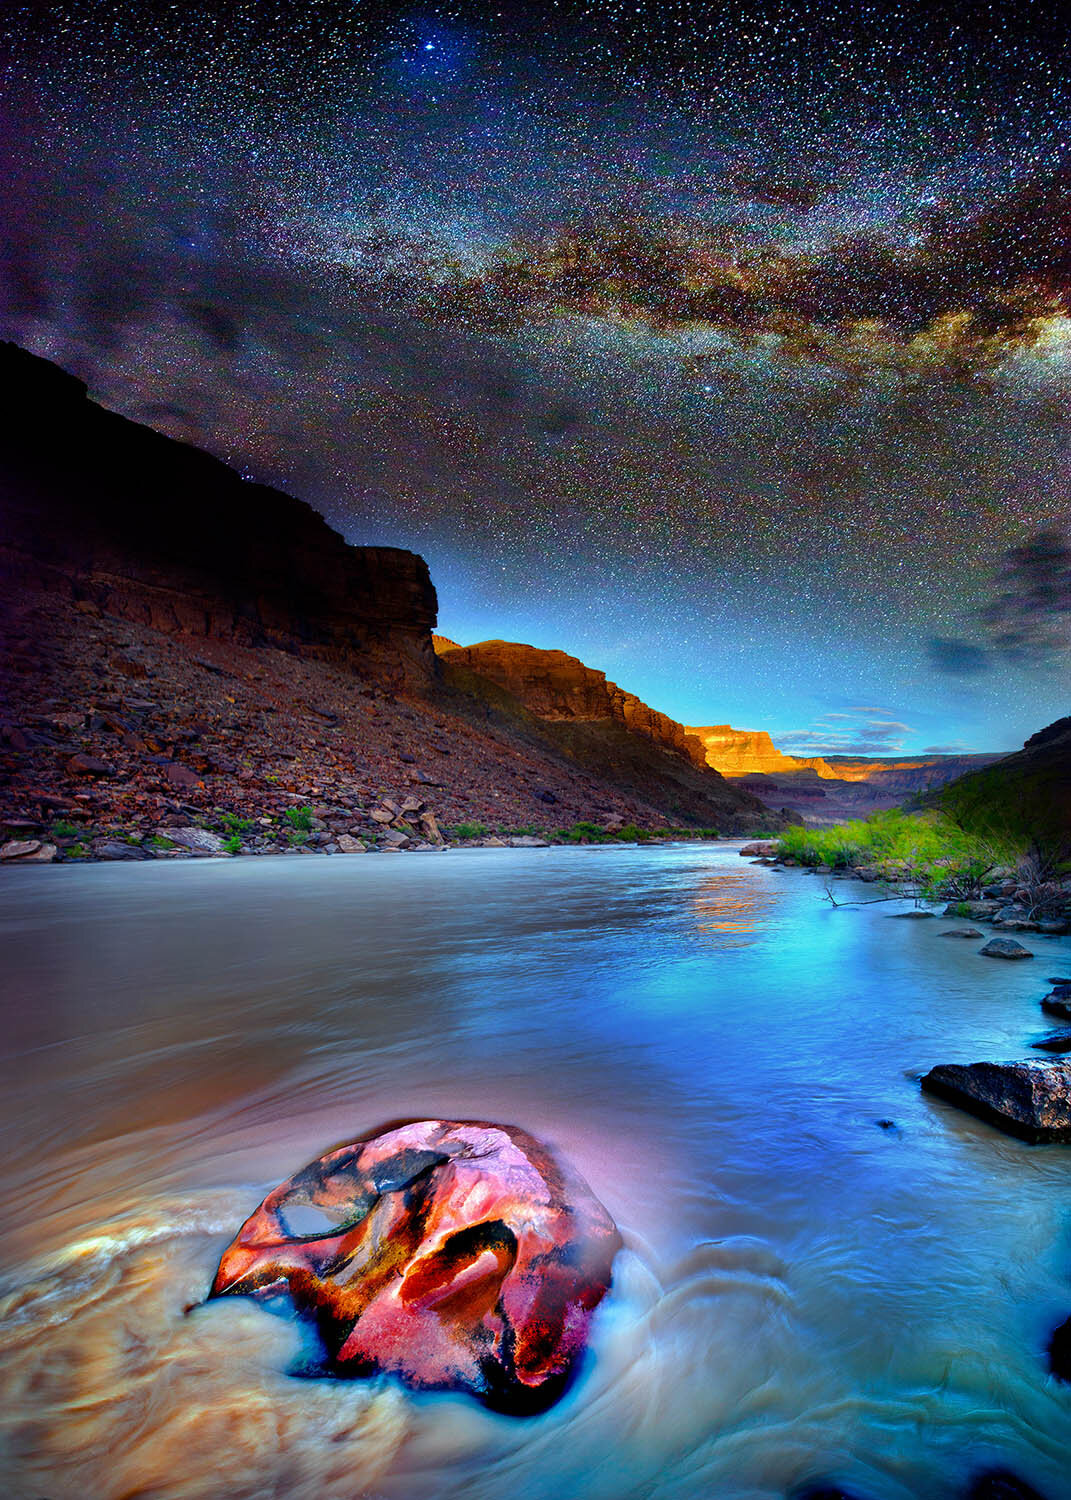 Eroded Stone in River with Milky Way and Sunset, Looking upstrea